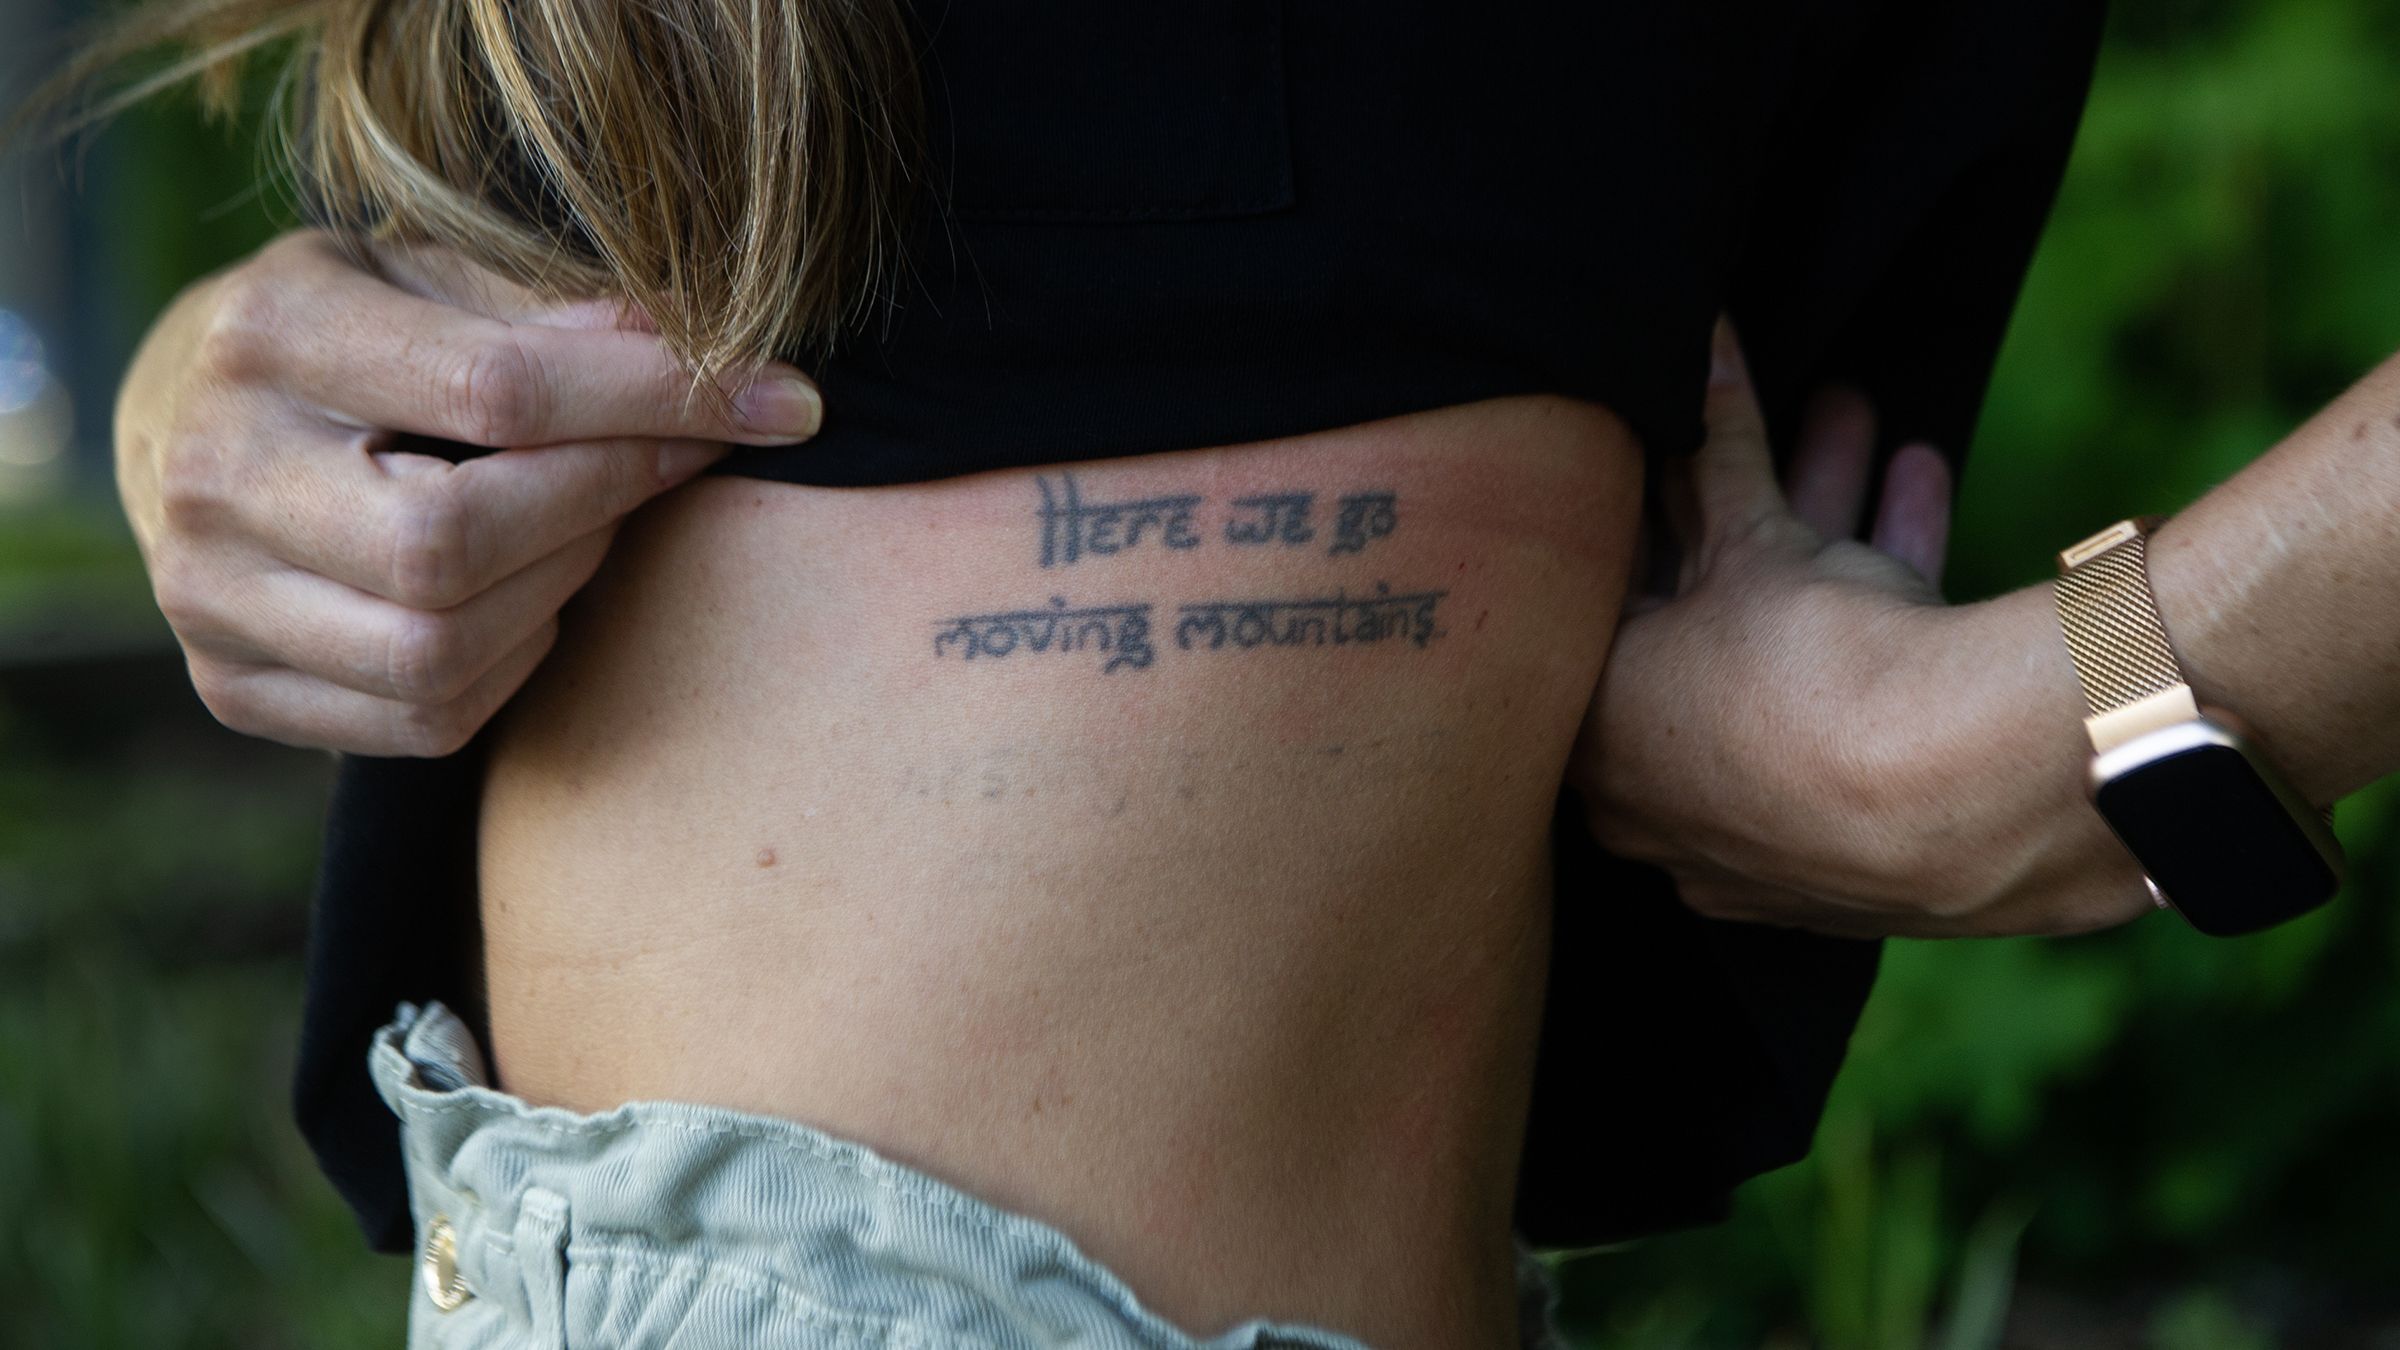 25 States With The Most Tattoo Regret